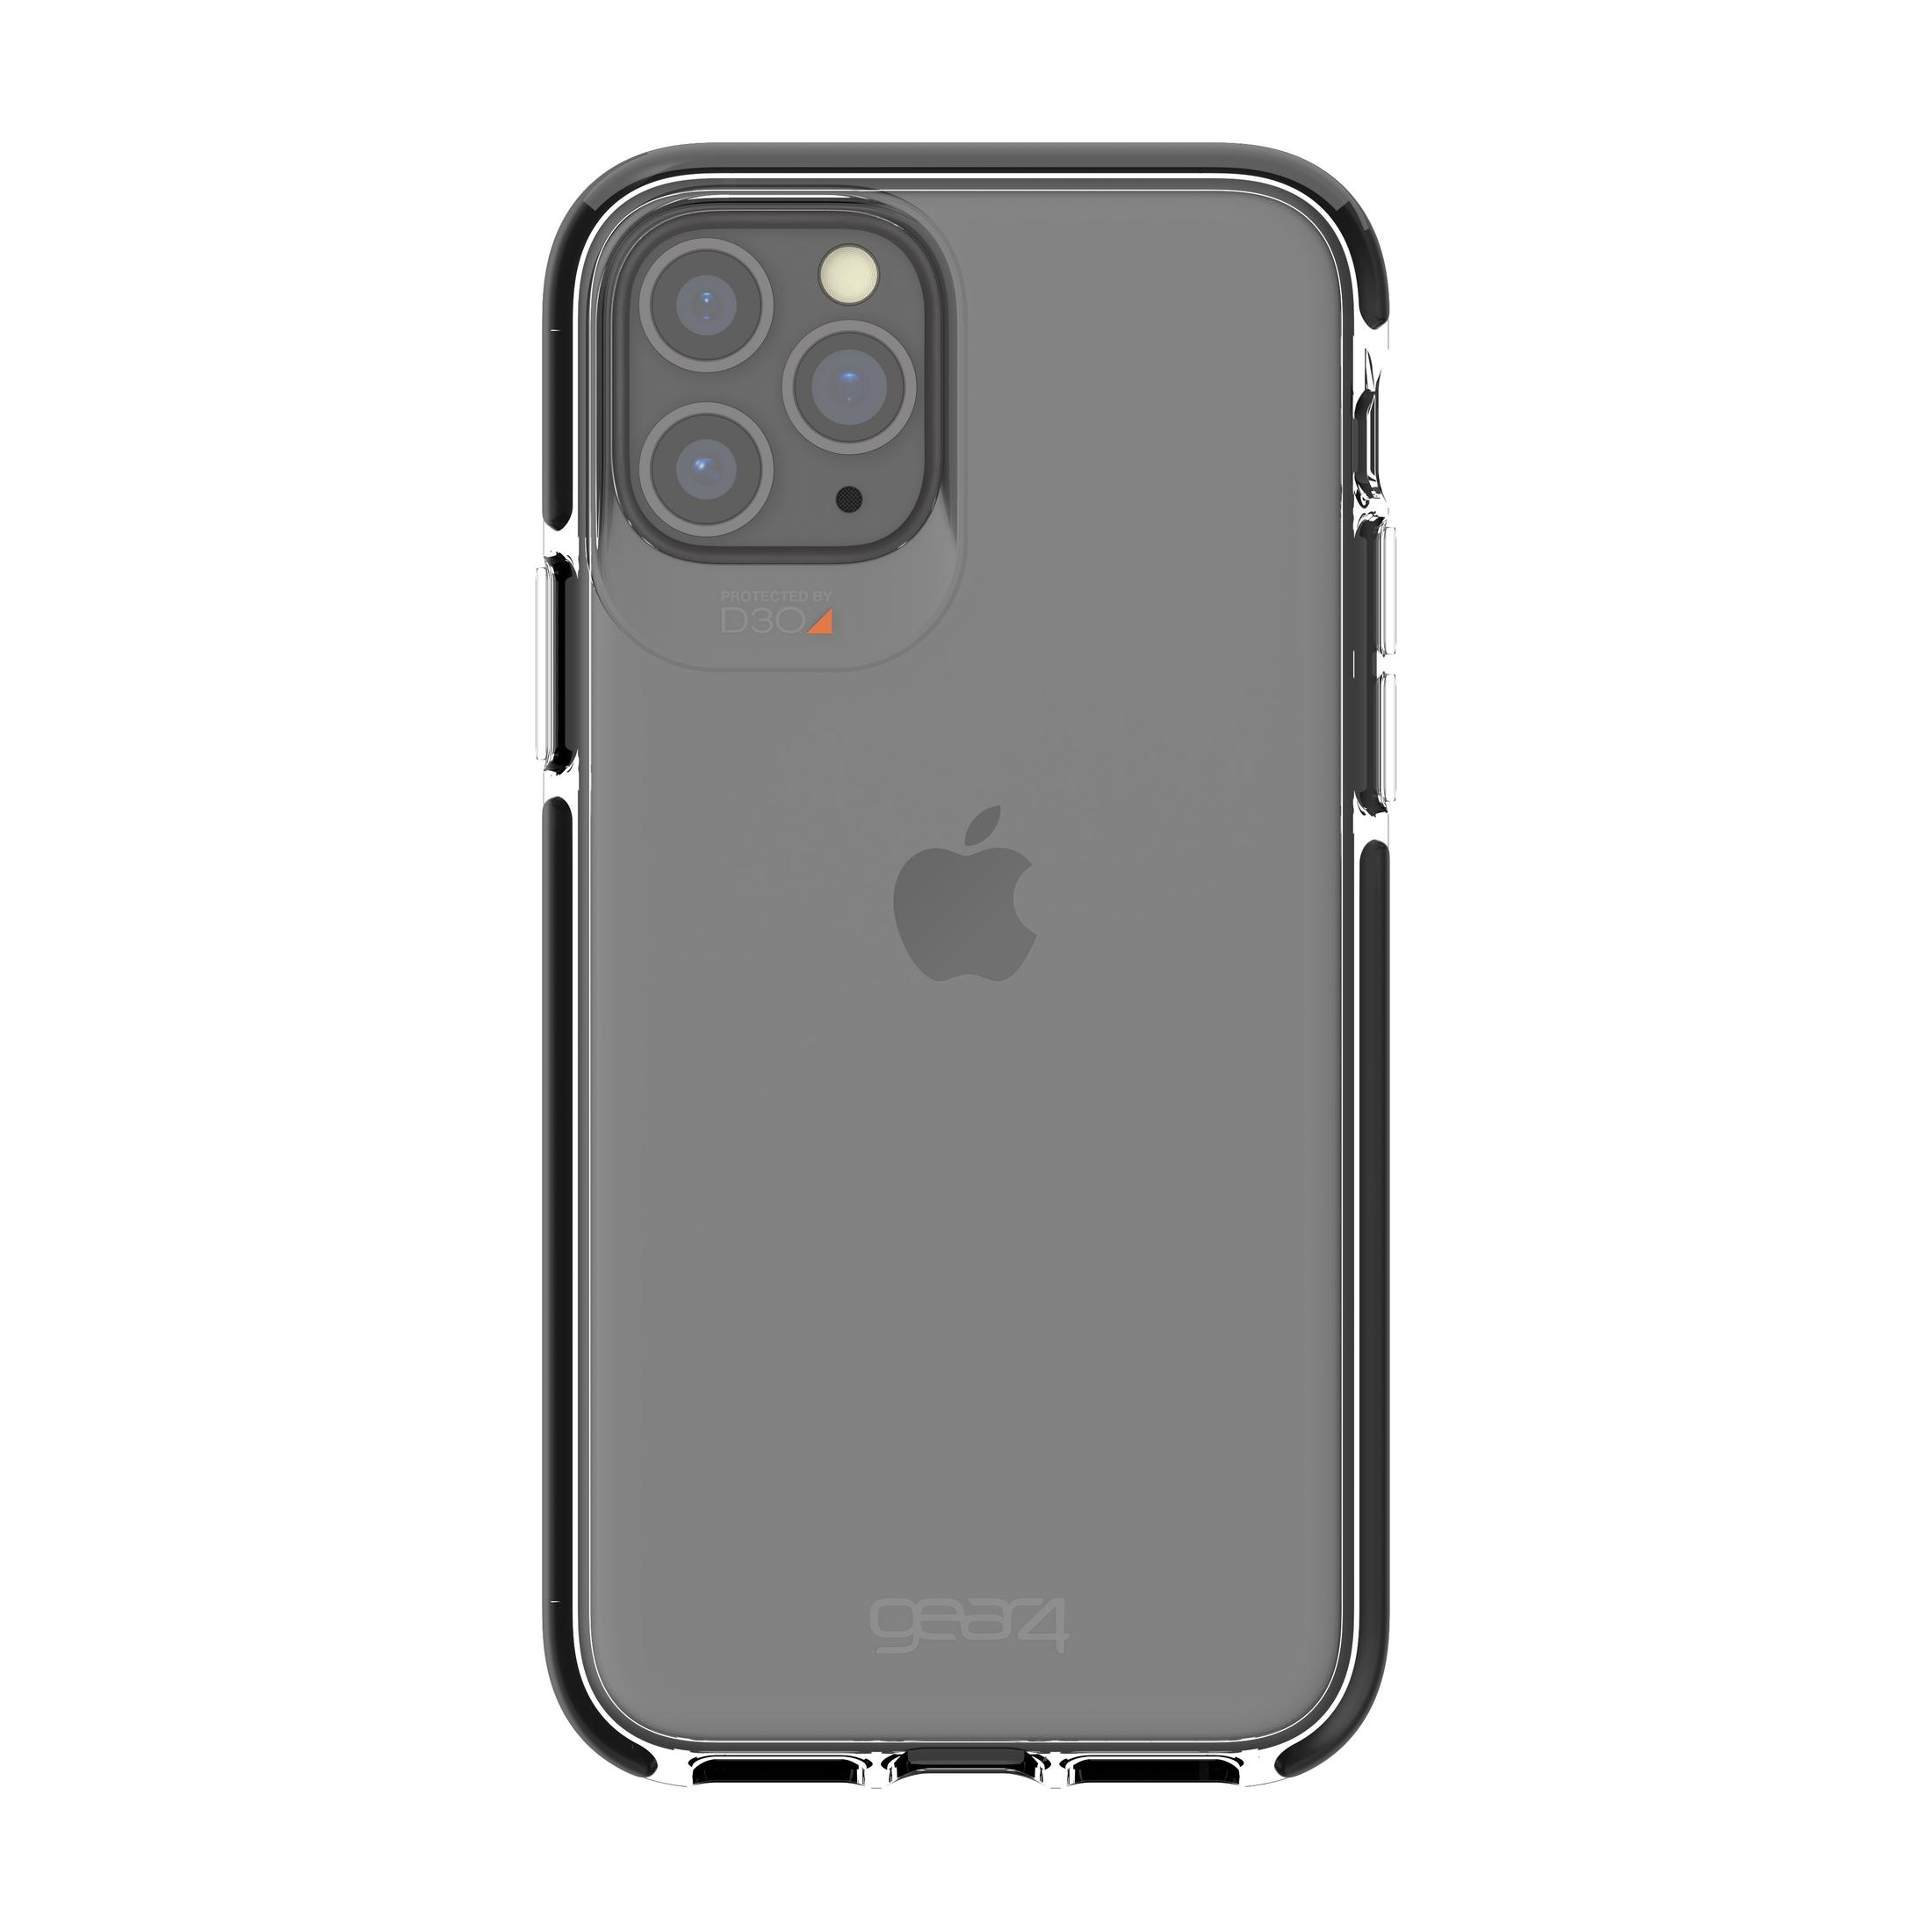 PRO GEAR4 IPHONE (BLACK), iPhone 11 Backcover, 11 Schwarz Pro, PICCADILLY 0S32919 Apple,